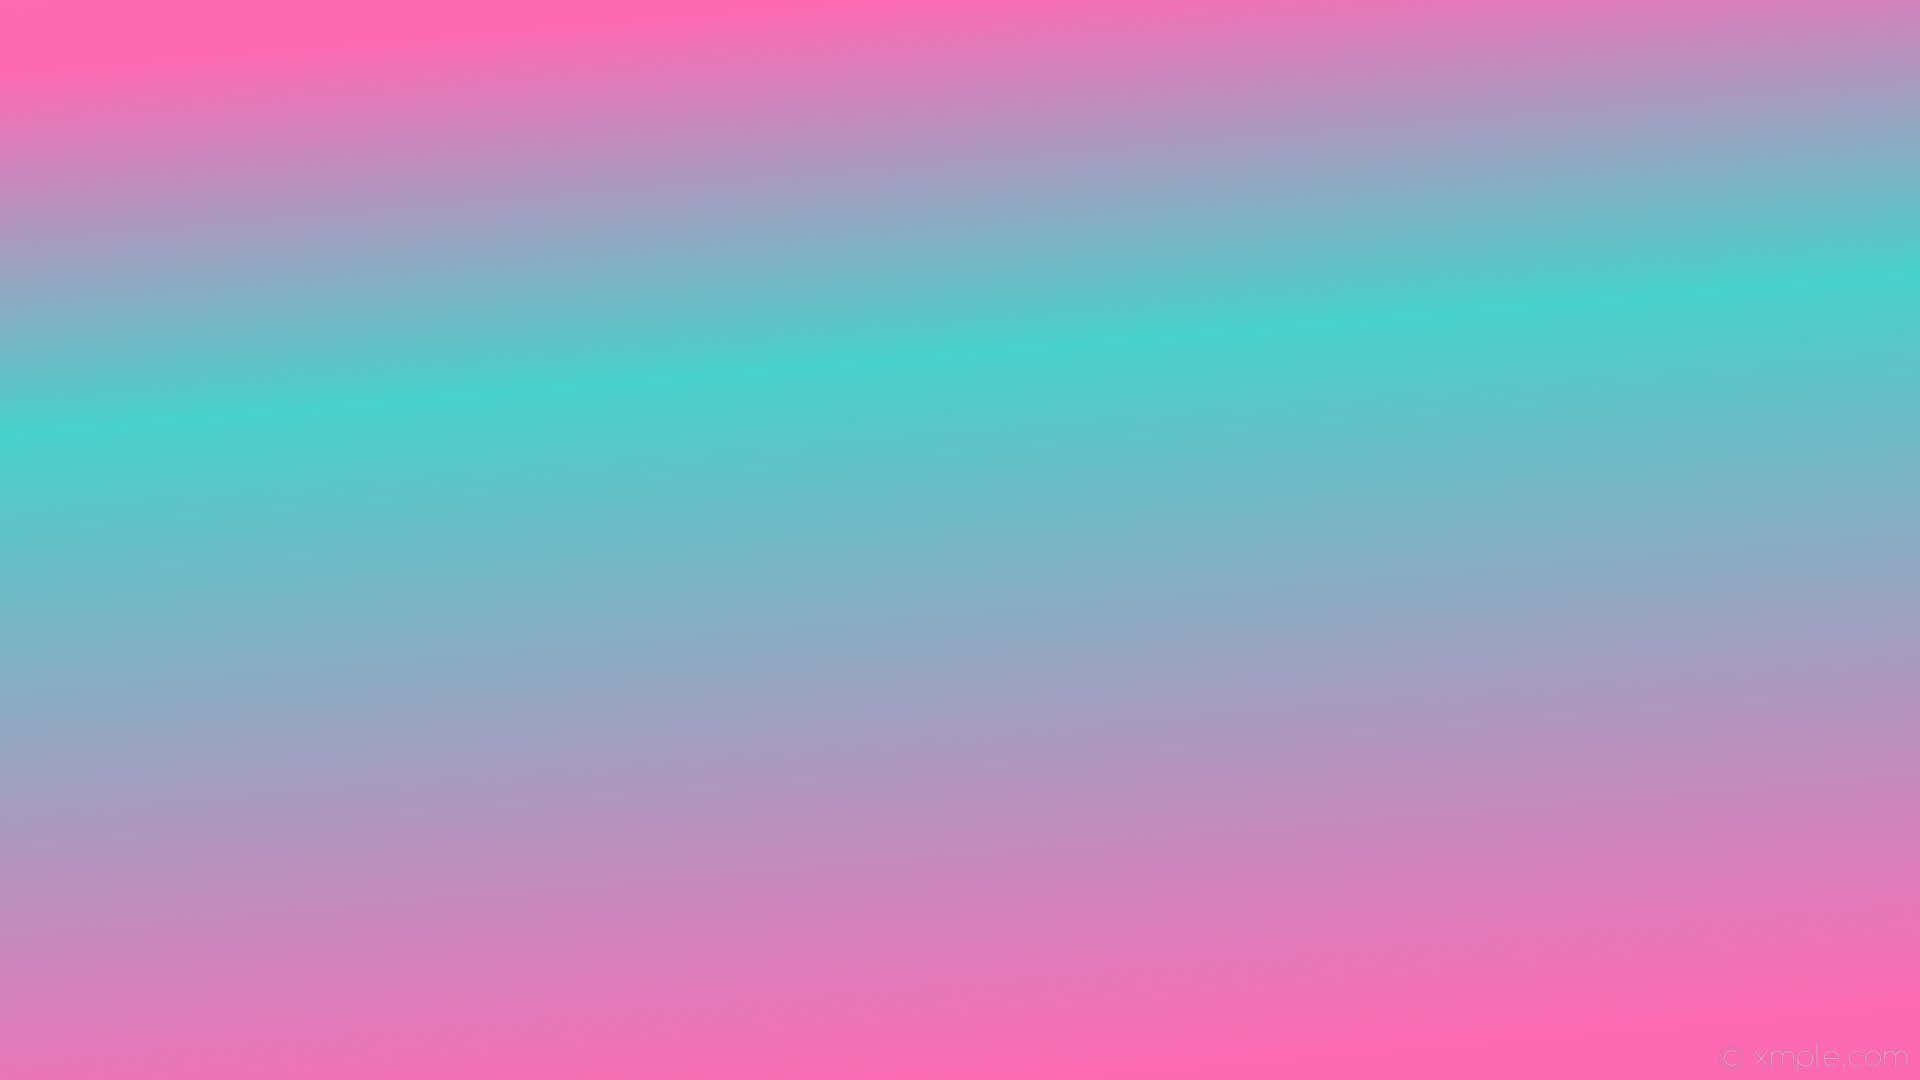 Pink And Teal - Wallpaper Pink And Blue Gradient Wallpaper